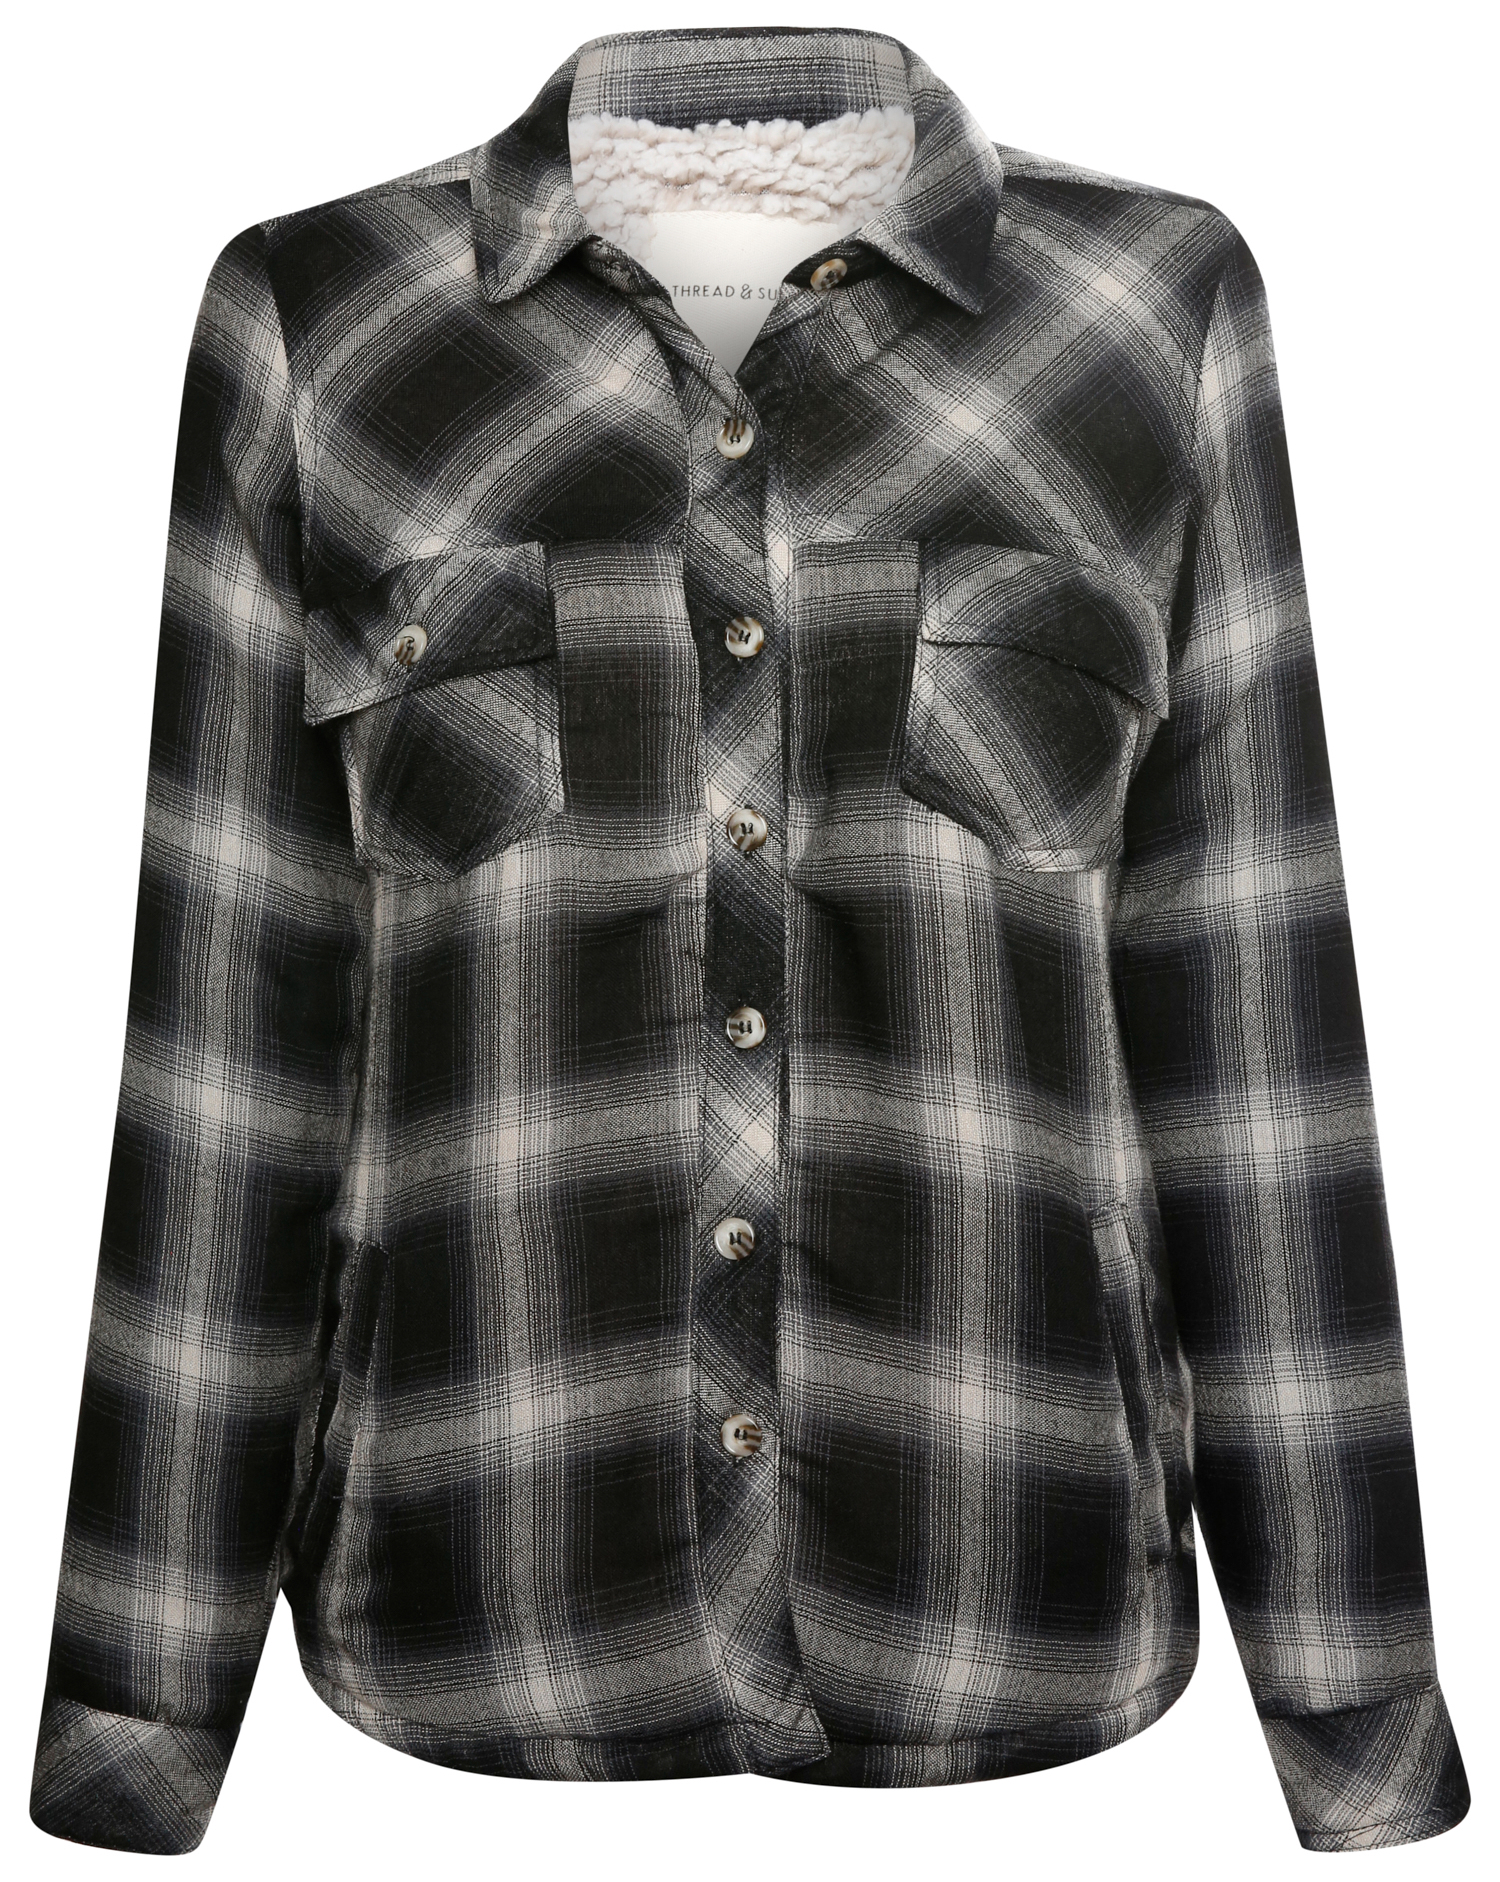 Thread & Supply Sherpa Lined Plaid Jacket